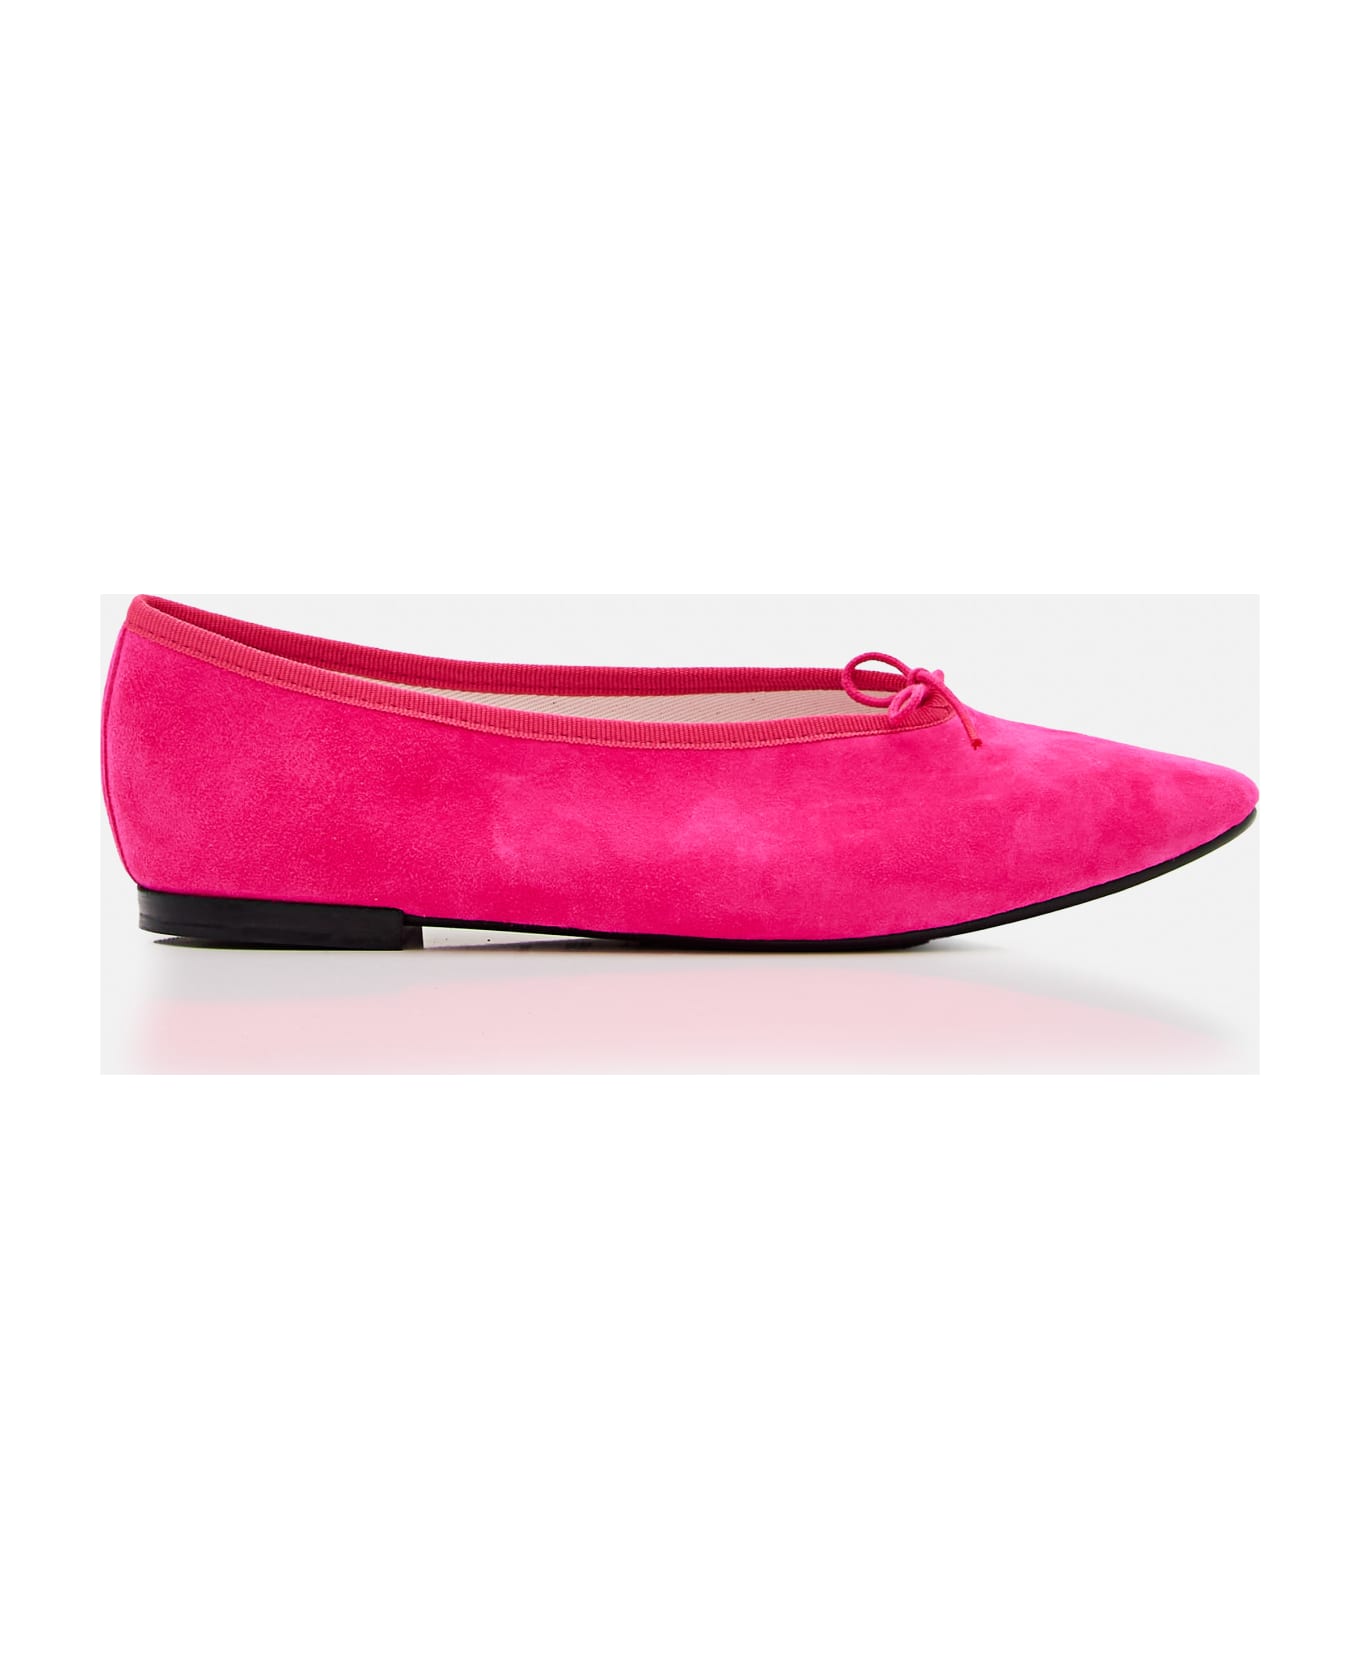 Repetto Lilouh Leather Ballerinas - Pink フラットシューズ